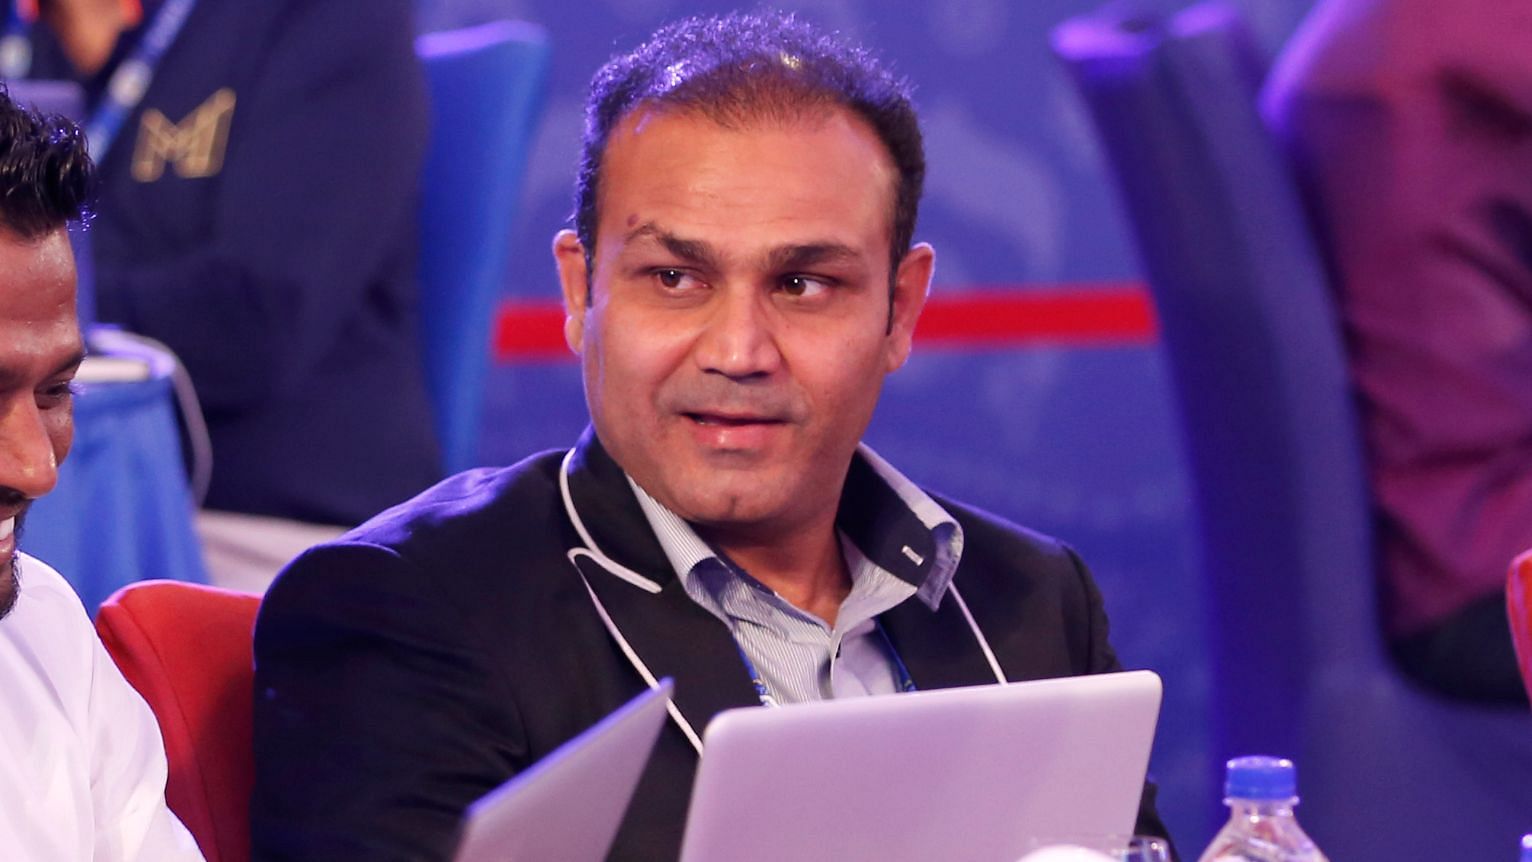 Virender Sehwag said that he had seen former captain Rahul Dravid get angry when a young MS Dhoni was dismissed due to a loose shot against Pakistan.